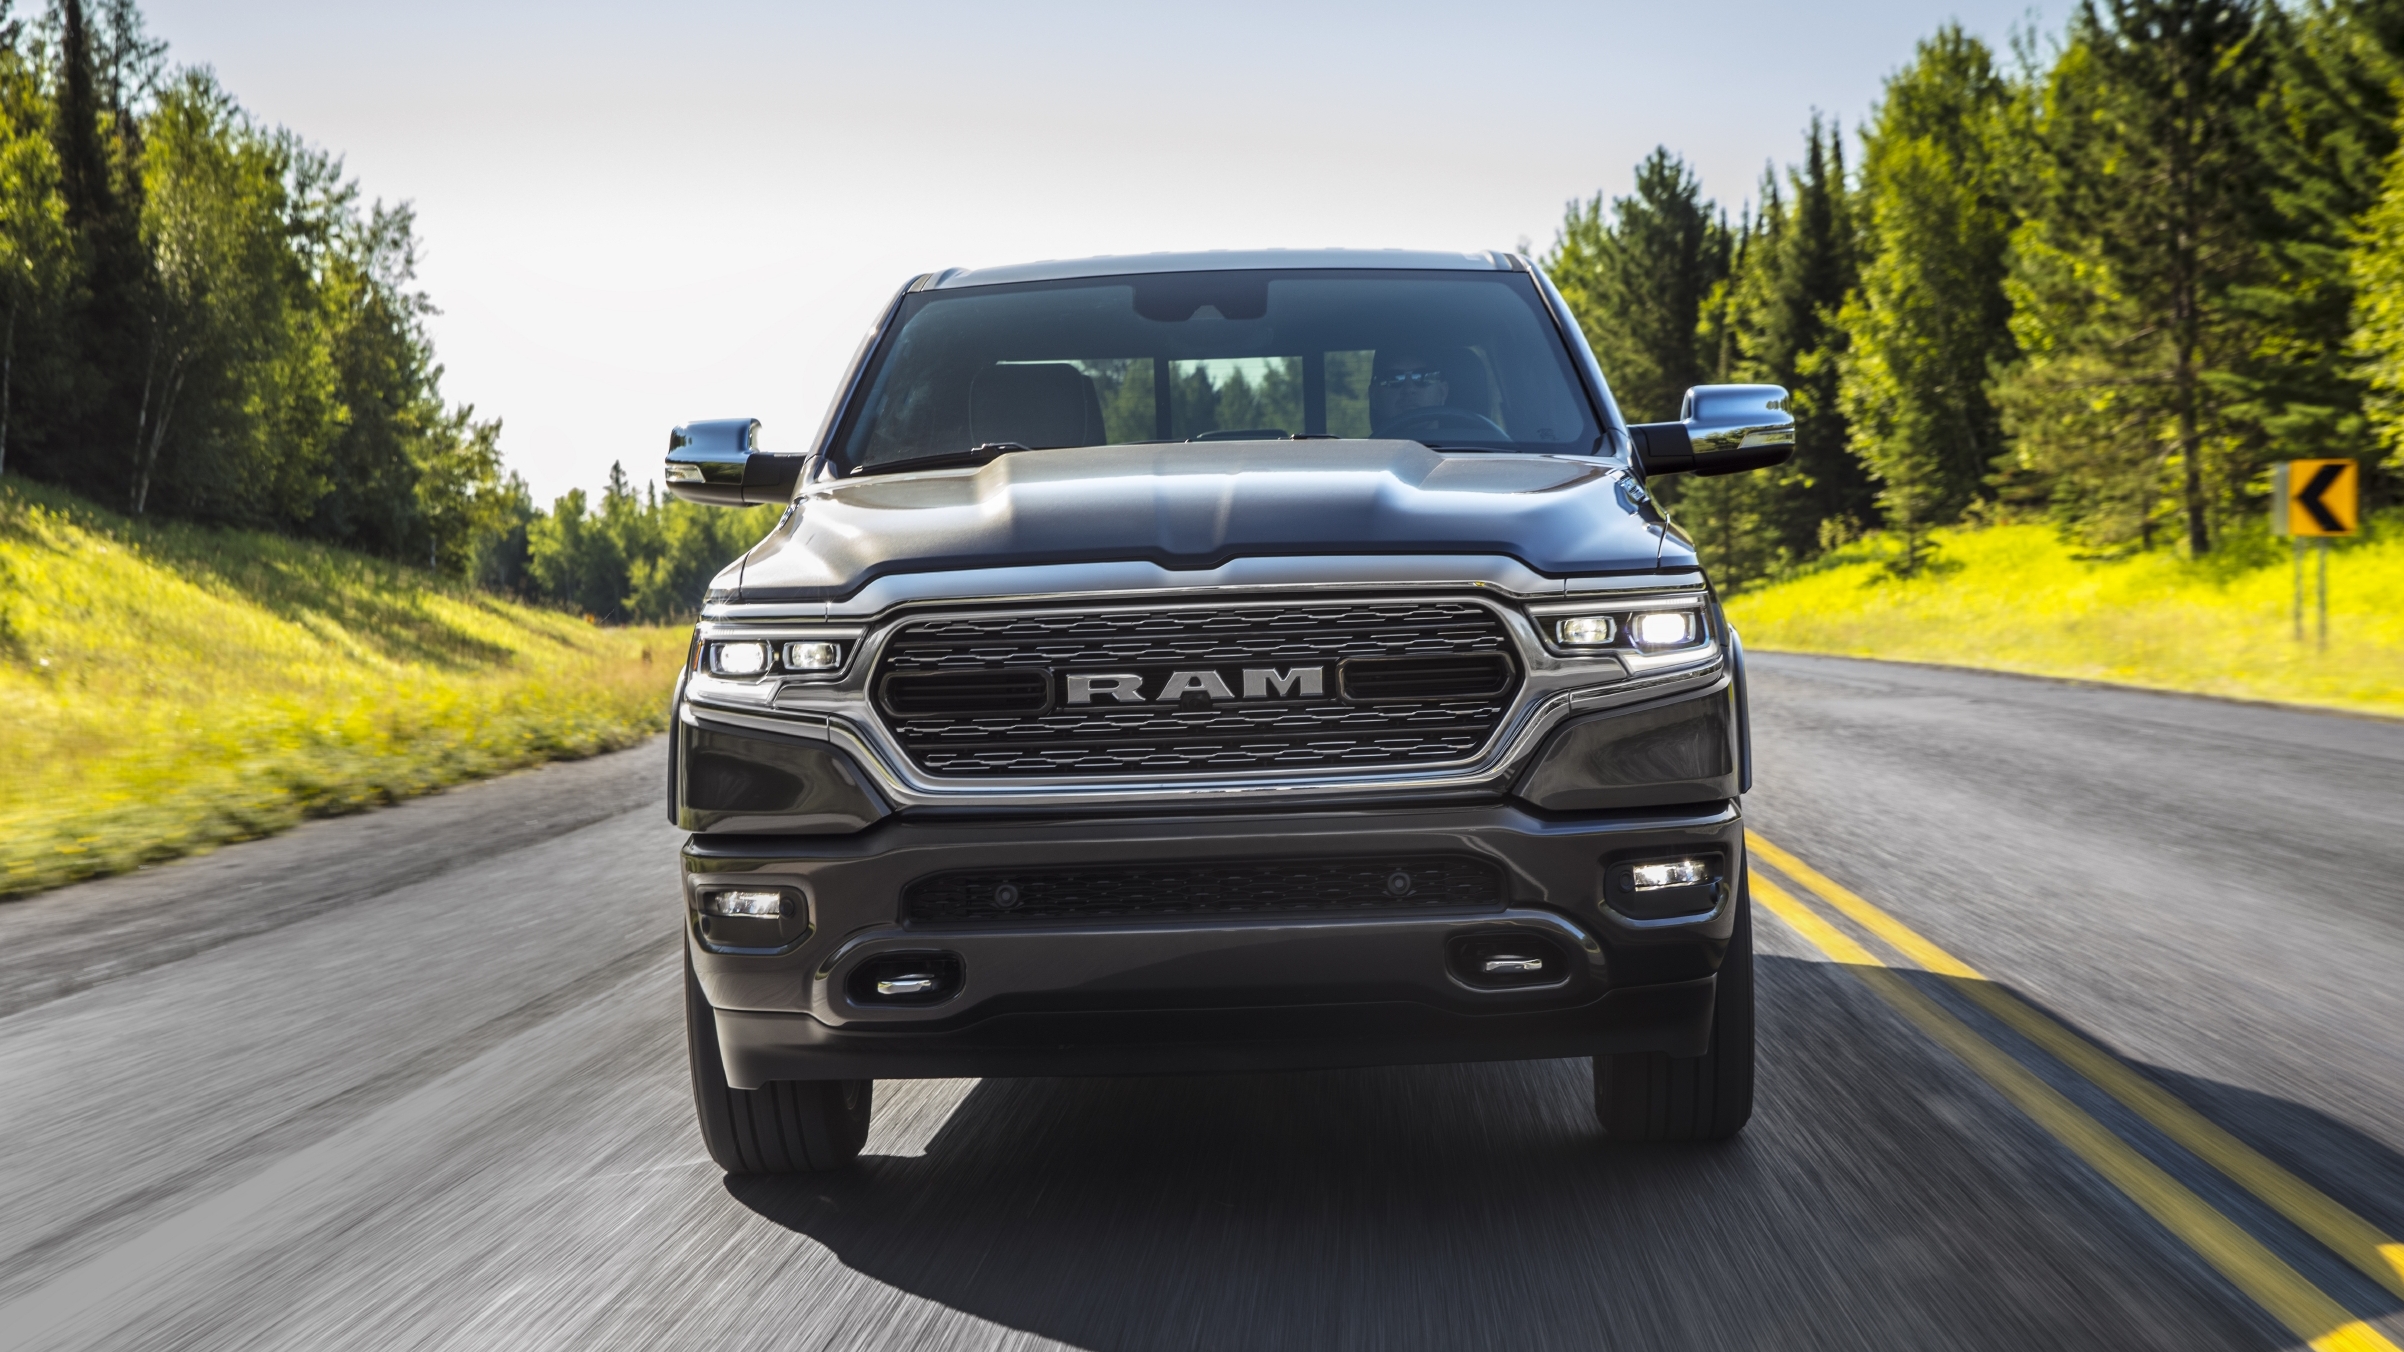 Ram Officially Announces Its Limited Elite Edition Package For The